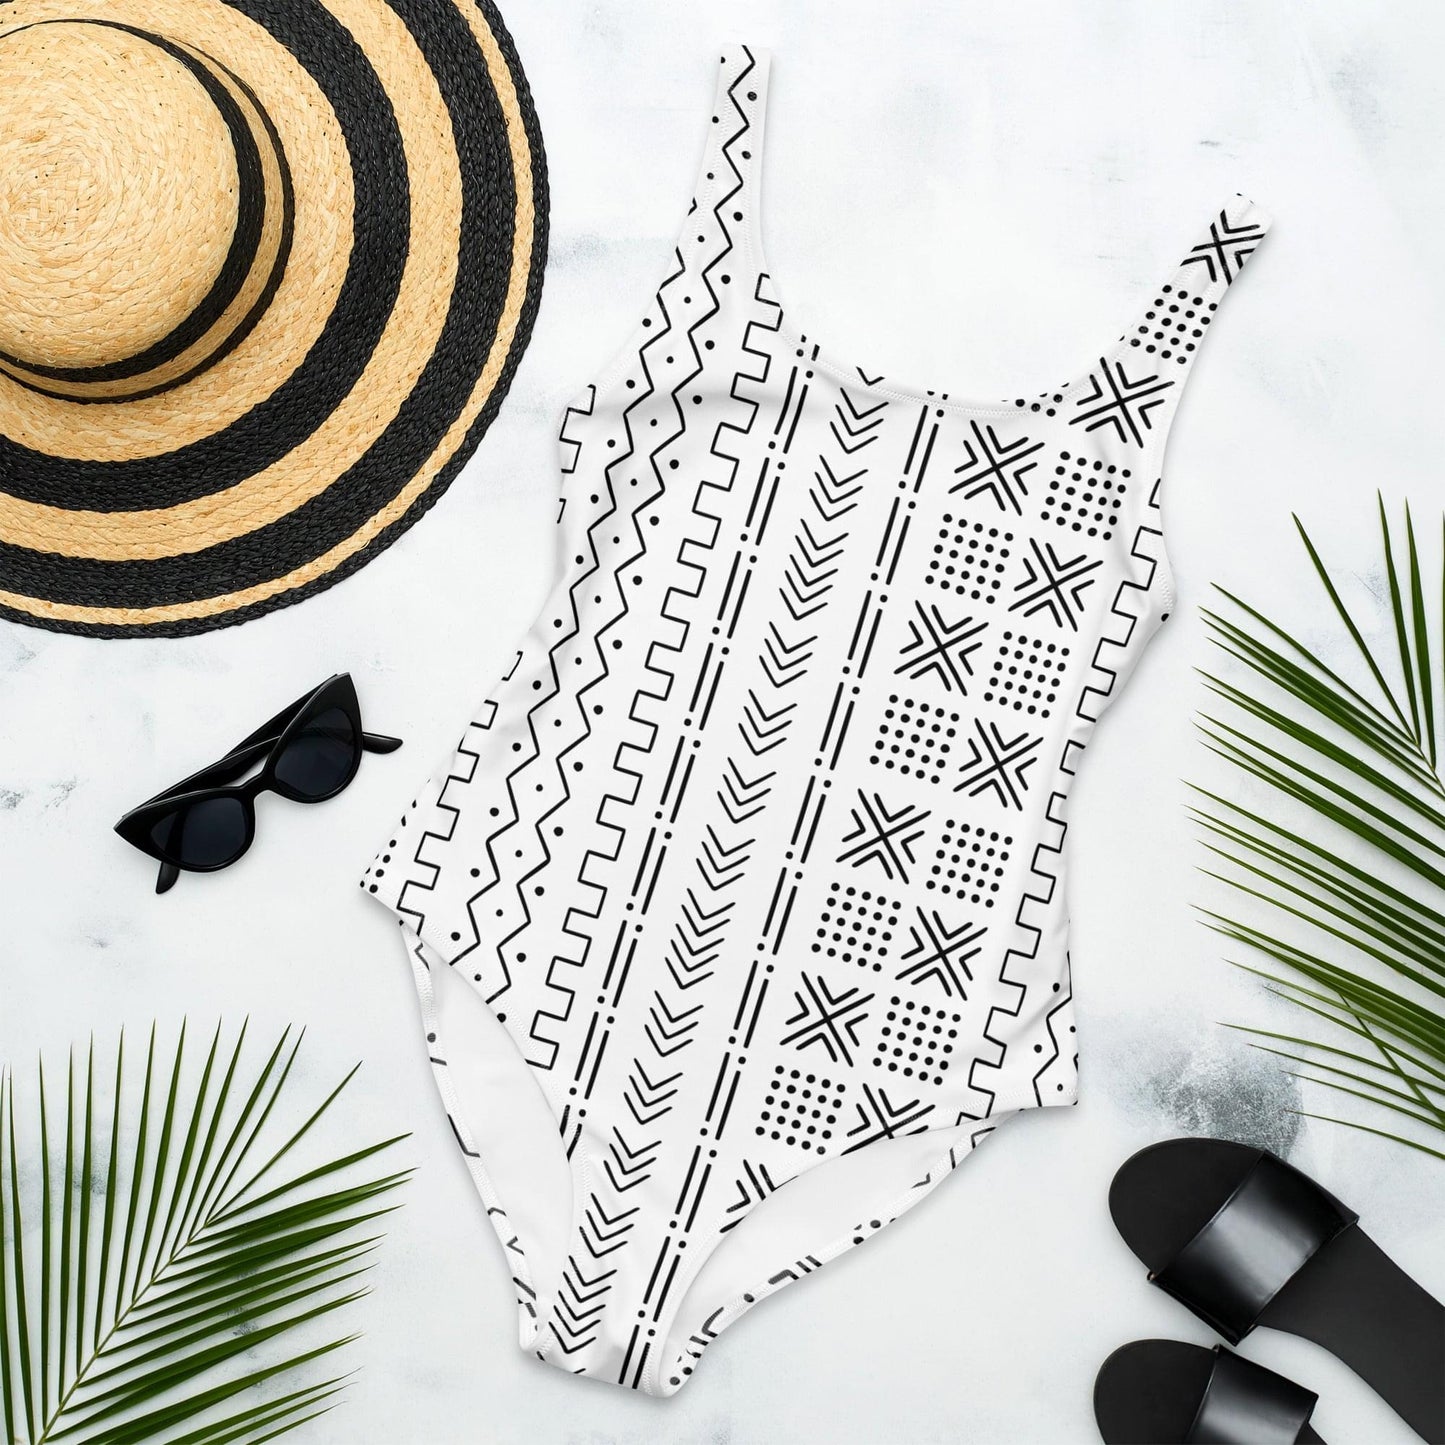 African Mud Cloth One-Piece Swimsuit